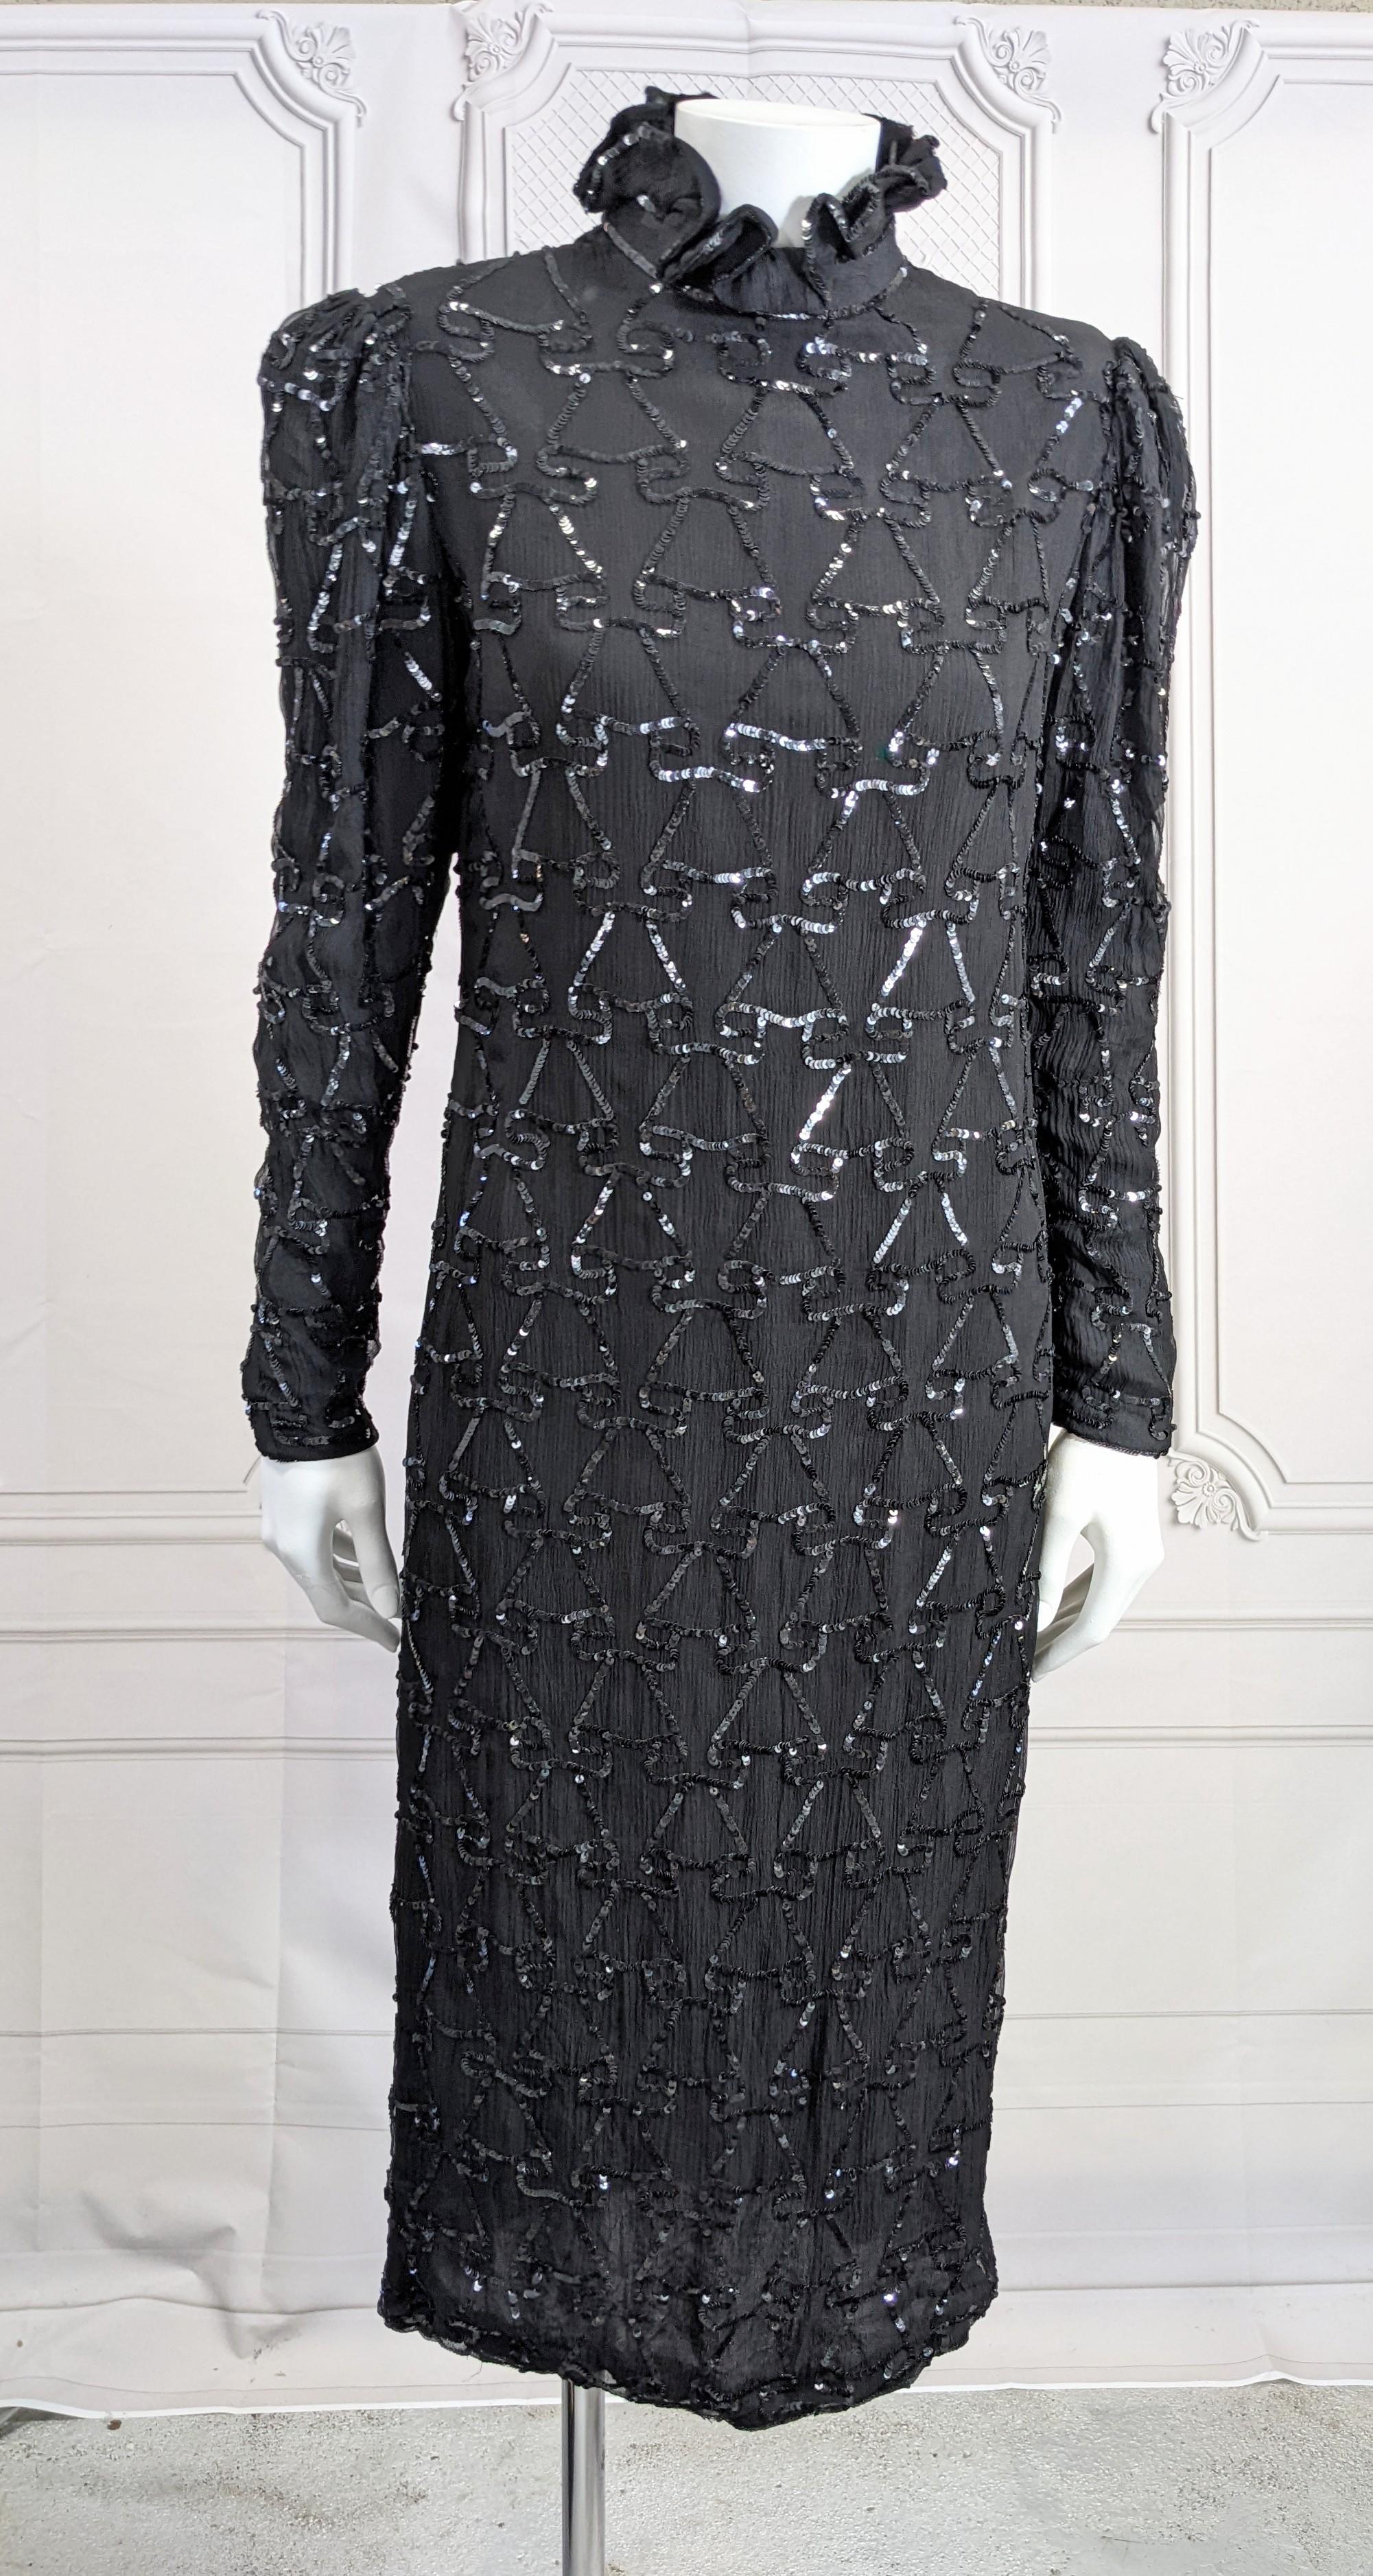 Silk Chiffon Sequin Ruffle Dress In Good Condition For Sale In New York, NY